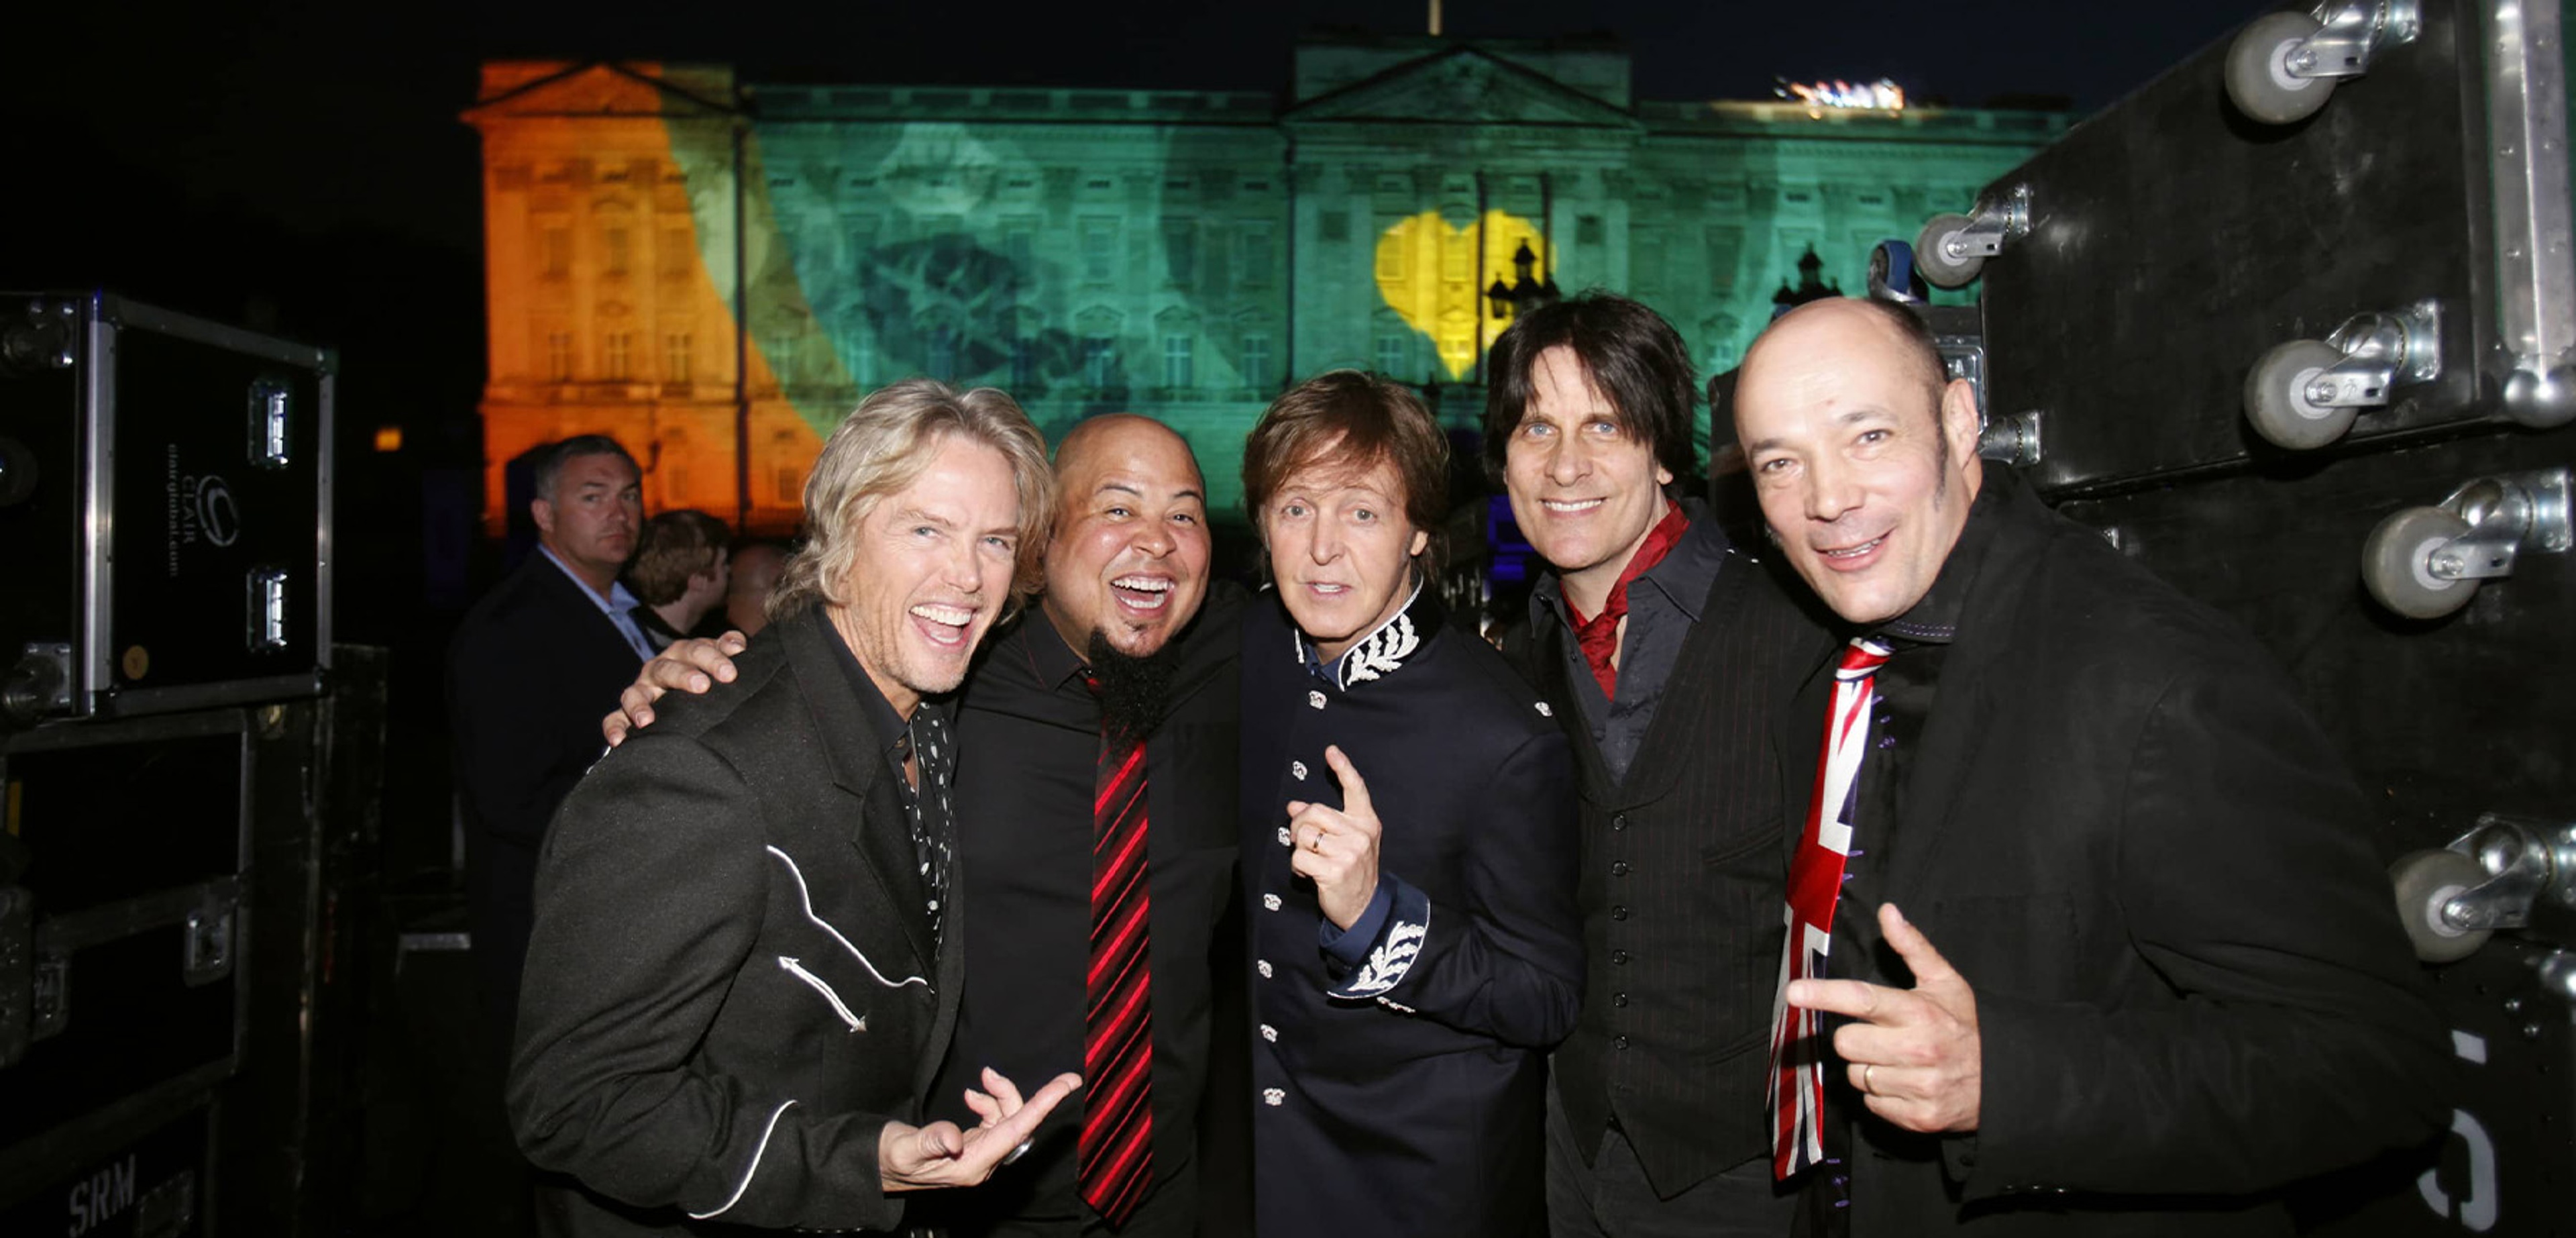 Photo of Paul and the band at The Queen's Diamond Jubilee Concert in 2012